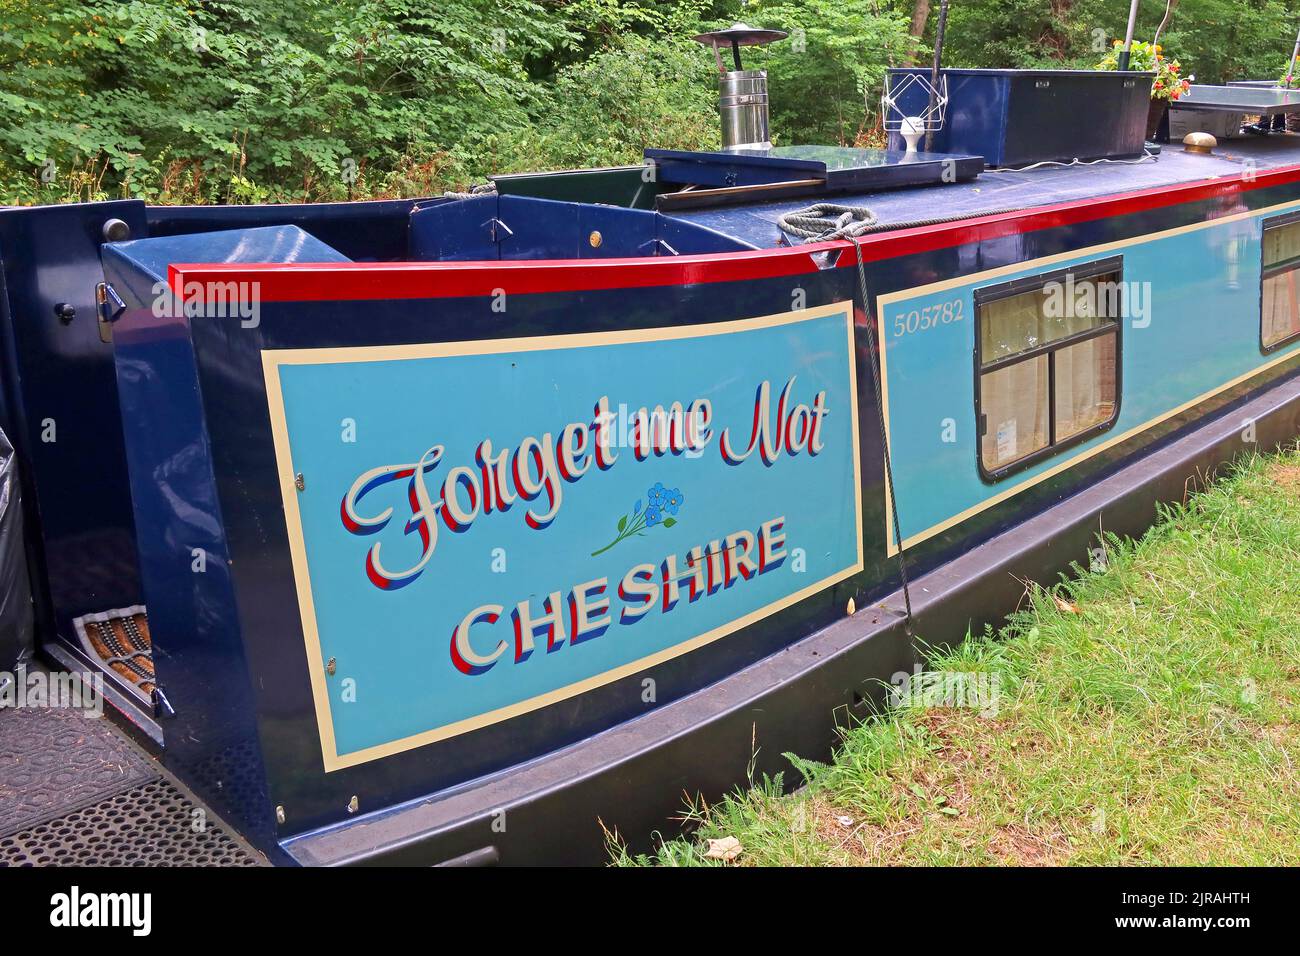 Forget Me Not canal barge 505782, Cheshire, Llangollen, Wales, UK Stock Photo